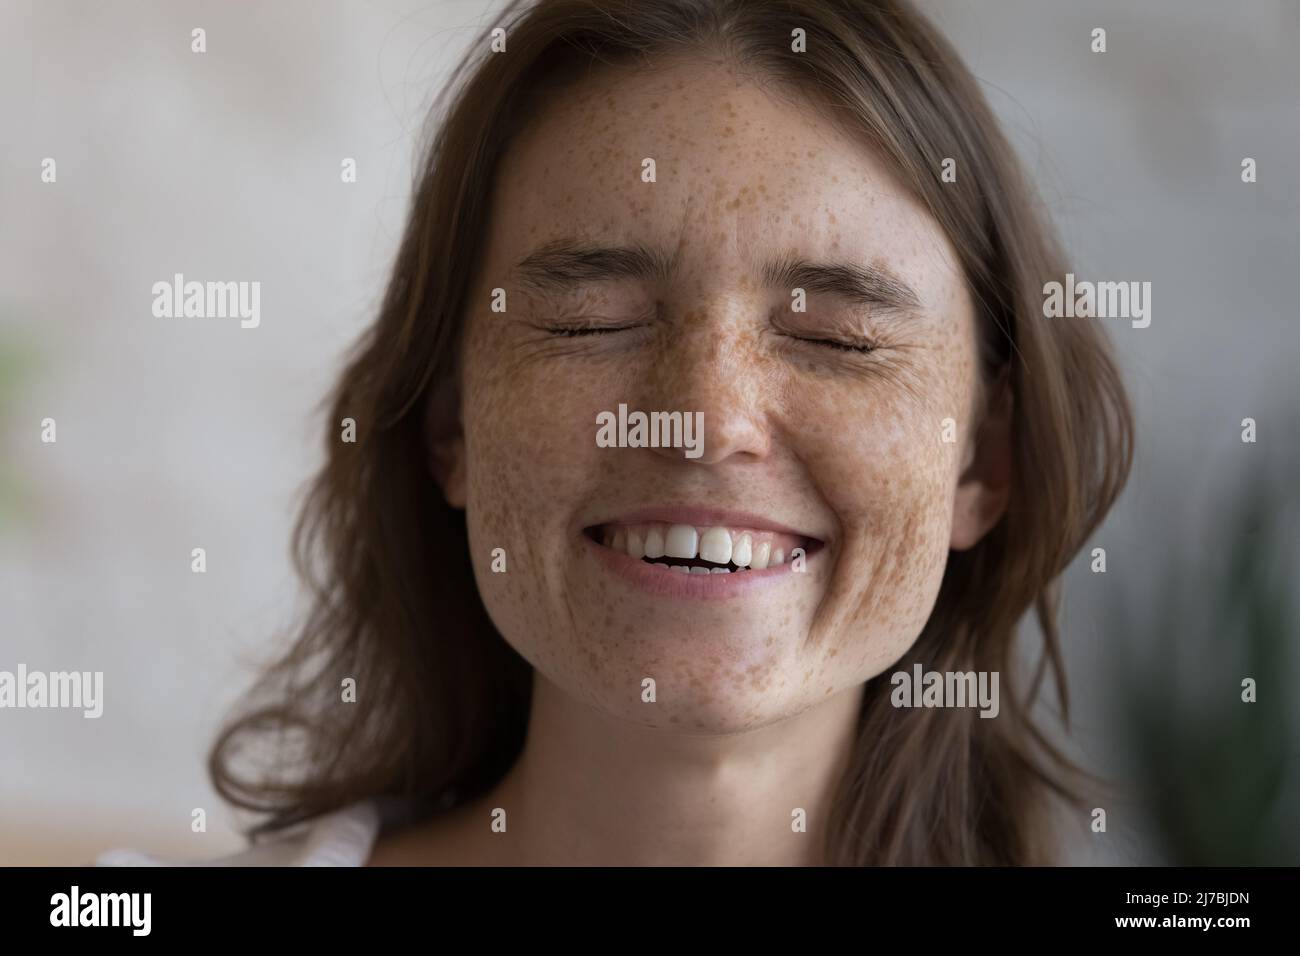 Cheerful excited freckled teen girl laughing with closed eyes Stock Photo